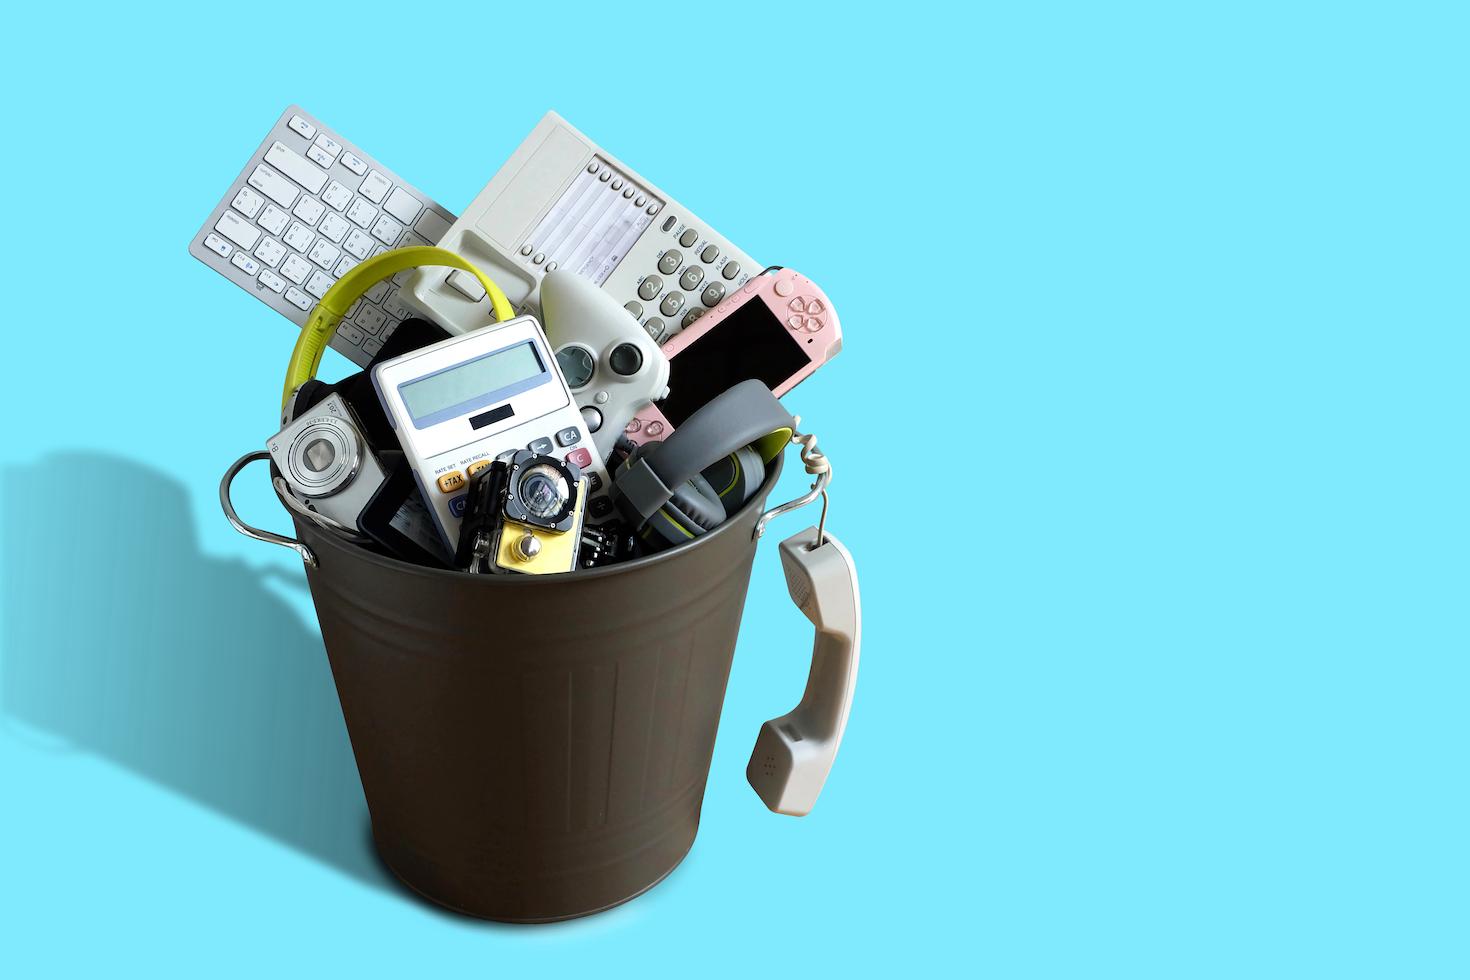 Graphic of phones, computer keyboards and other electronics devices heaped in a garbage bin.